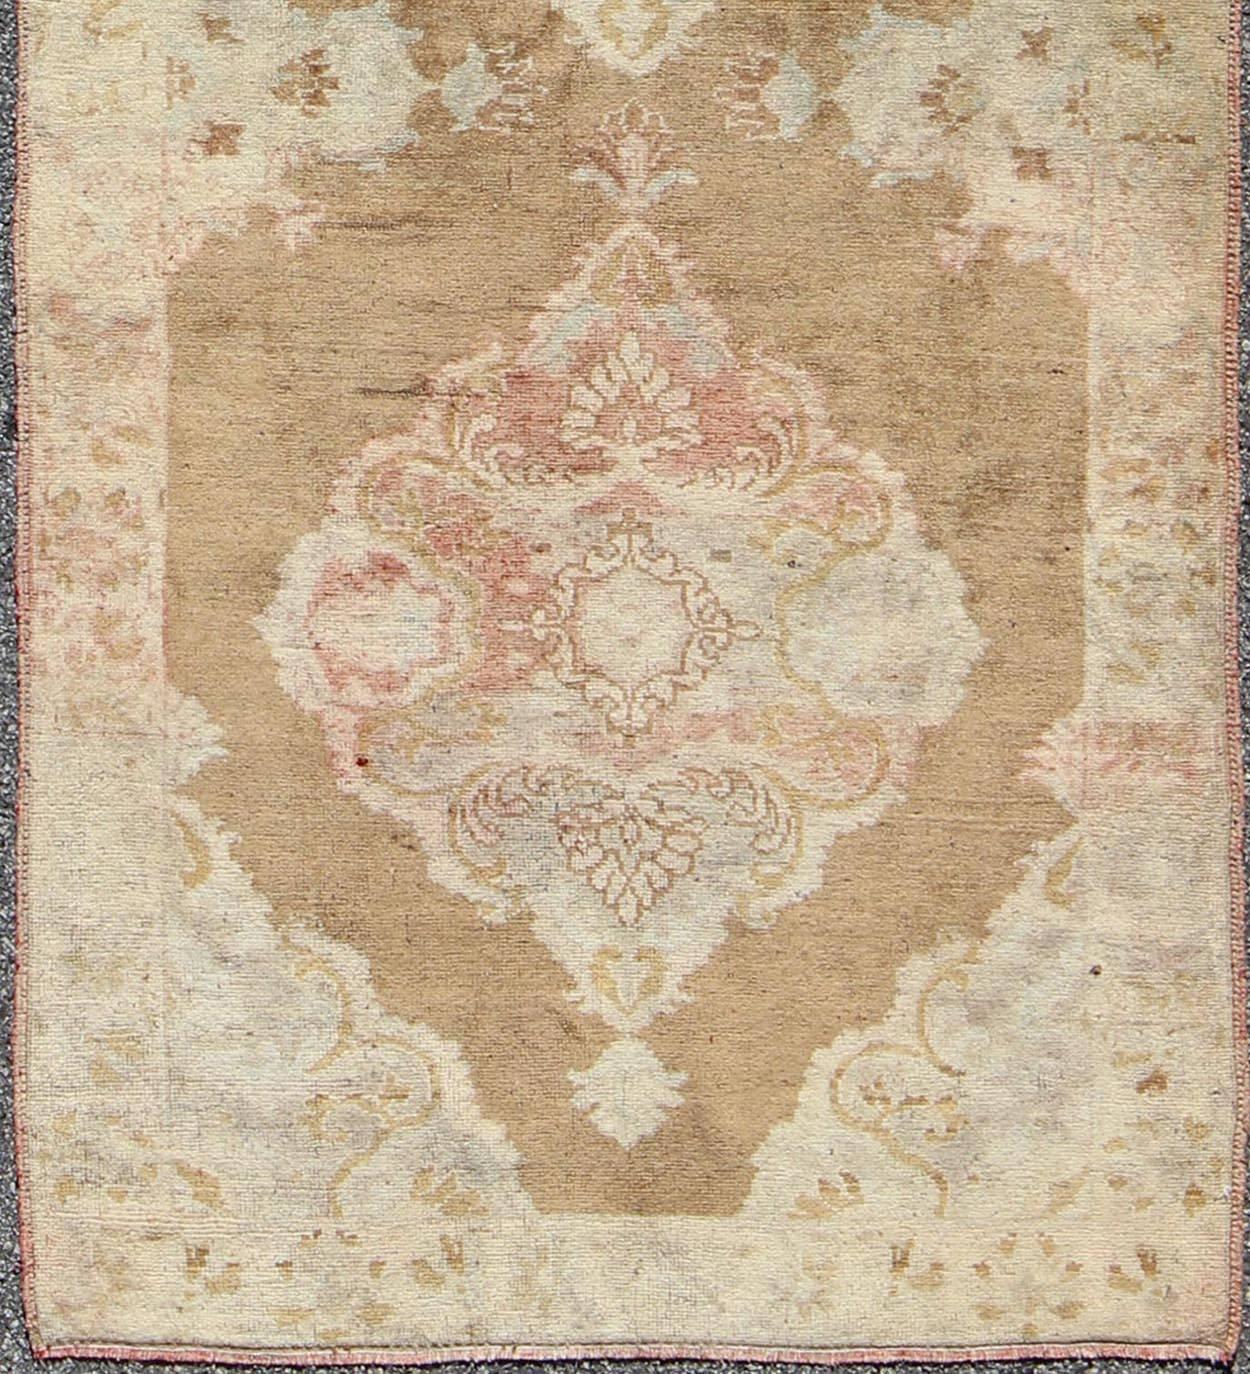 Vintage Turkish Oushak runner with floral medallions in light brown and ivory, rug tra-0912, country of origin / type: Turkey / Oushak, circa mid-20th century.

This beautiful vintage Oushak runner from mid-20th century Turkey features a classic